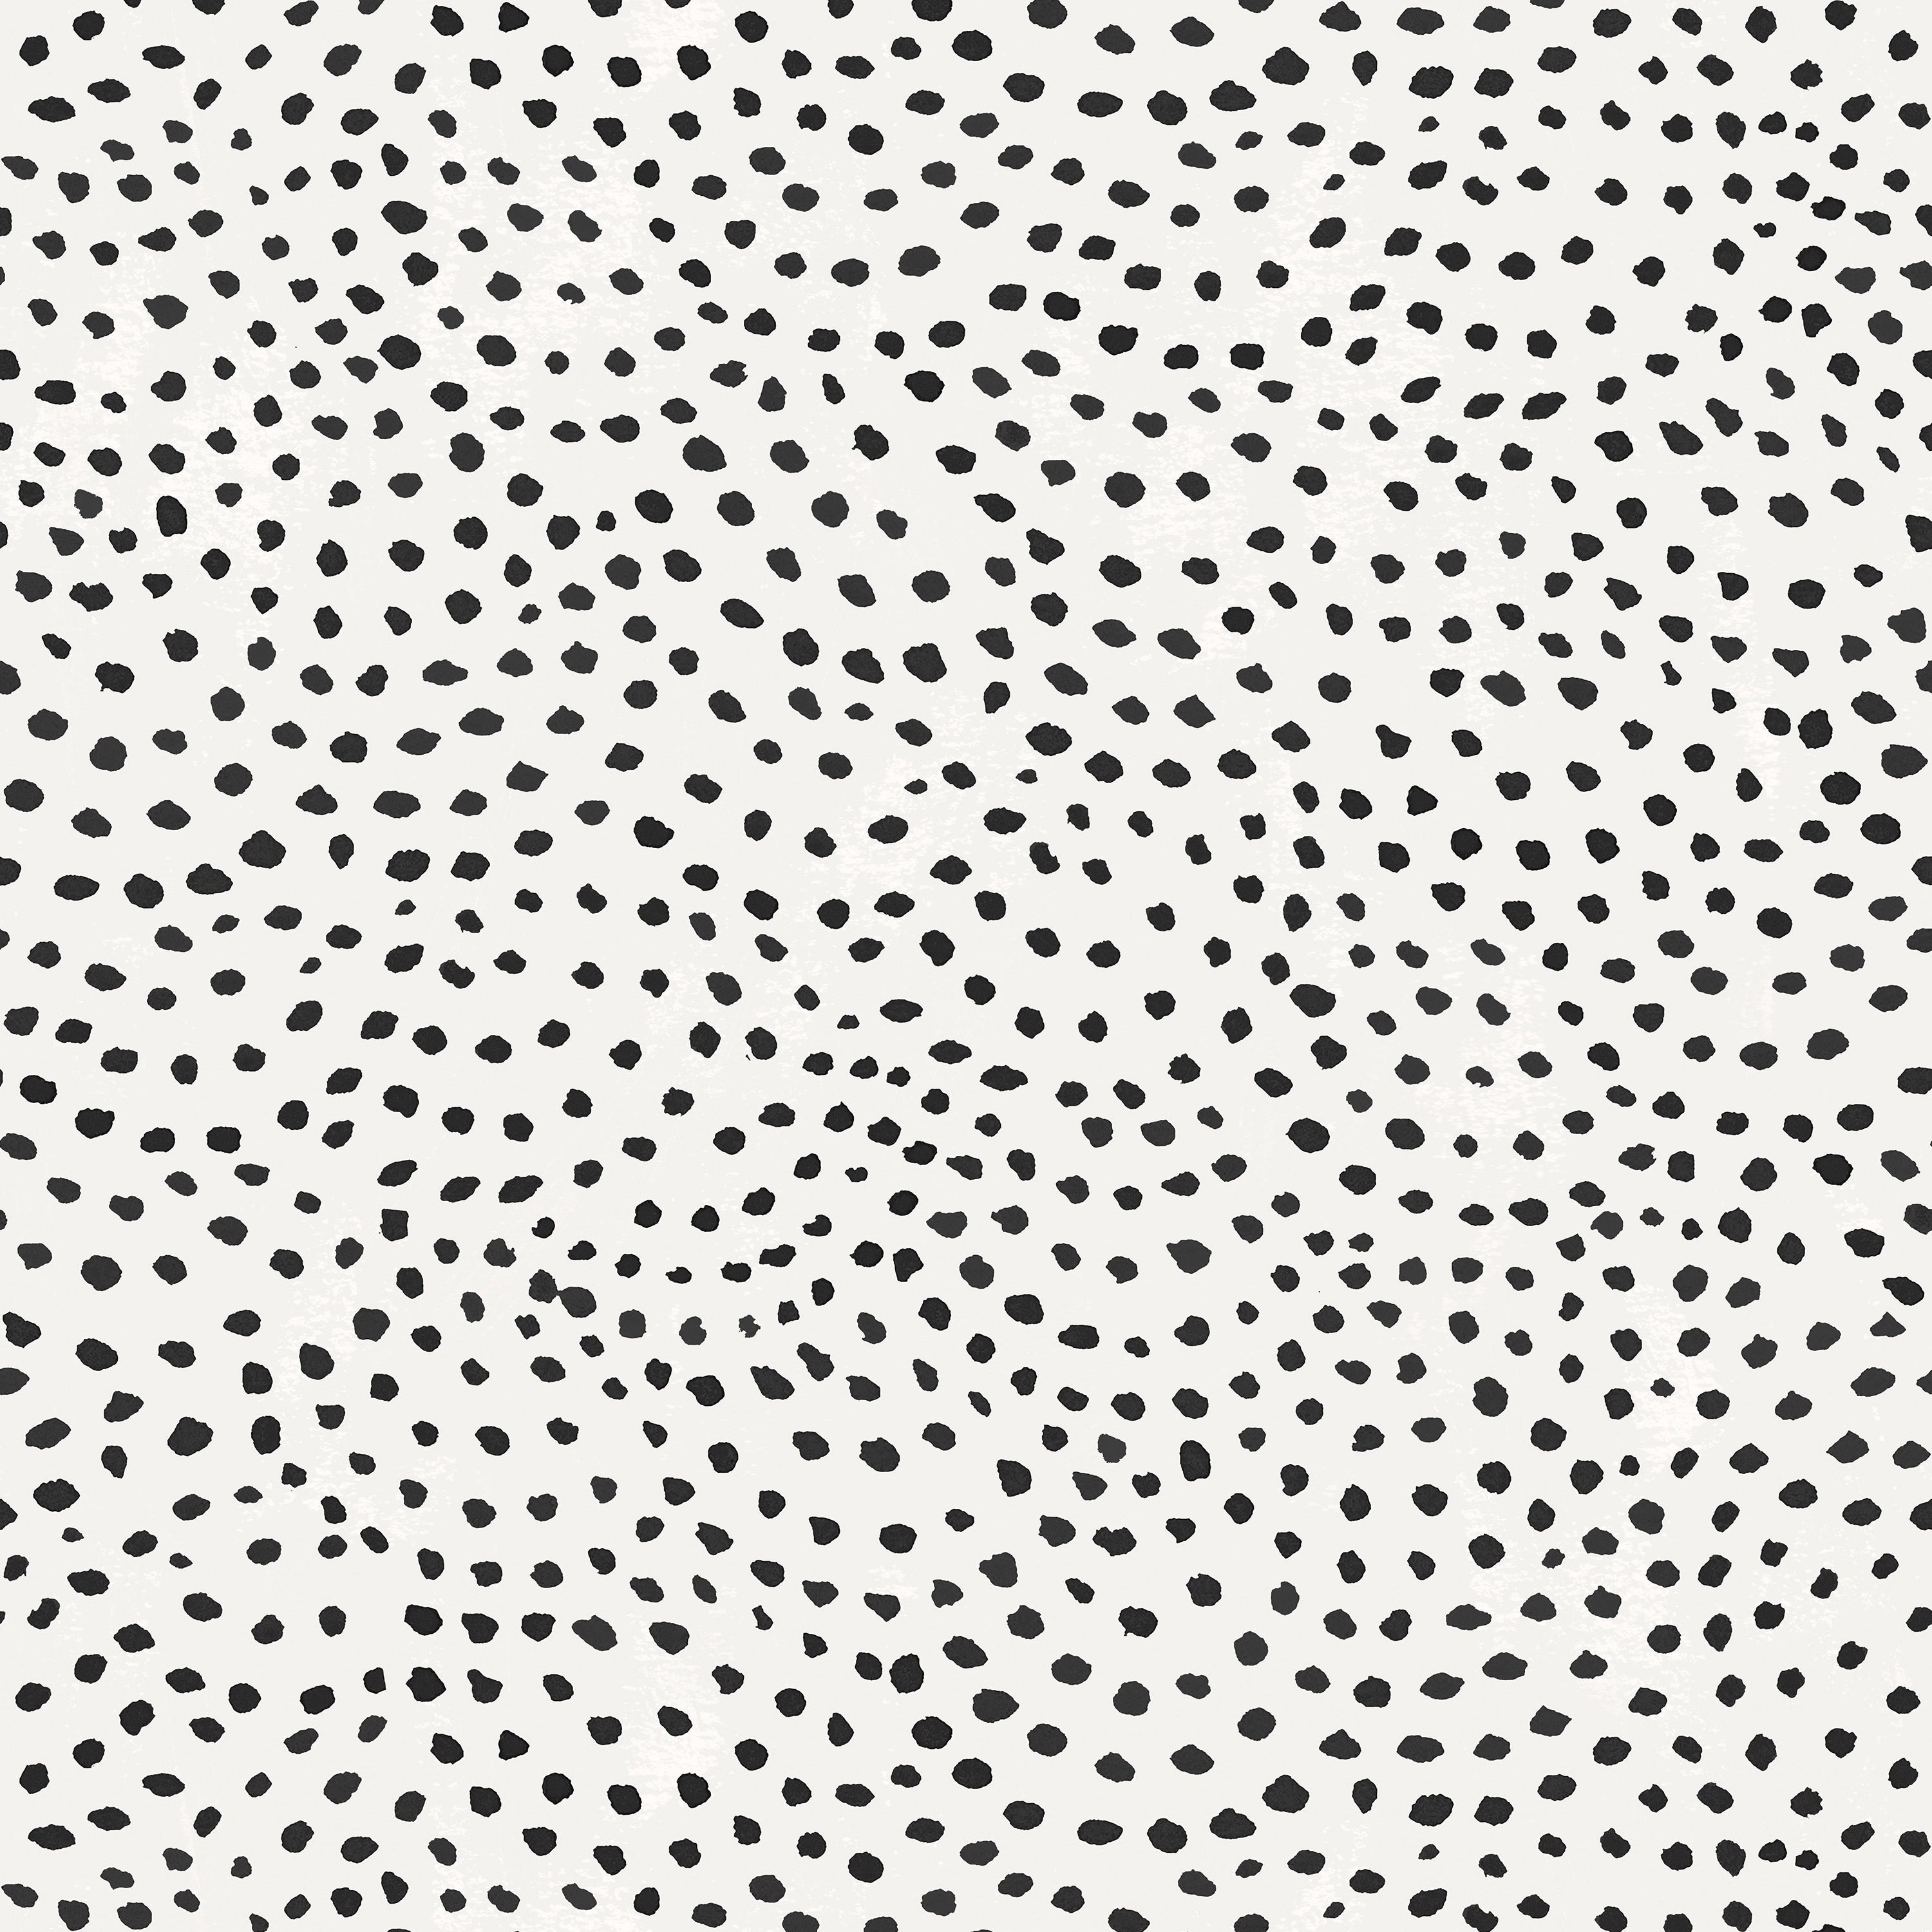 Detail of wallpaper in a scalloped dot print in black on a cream field.